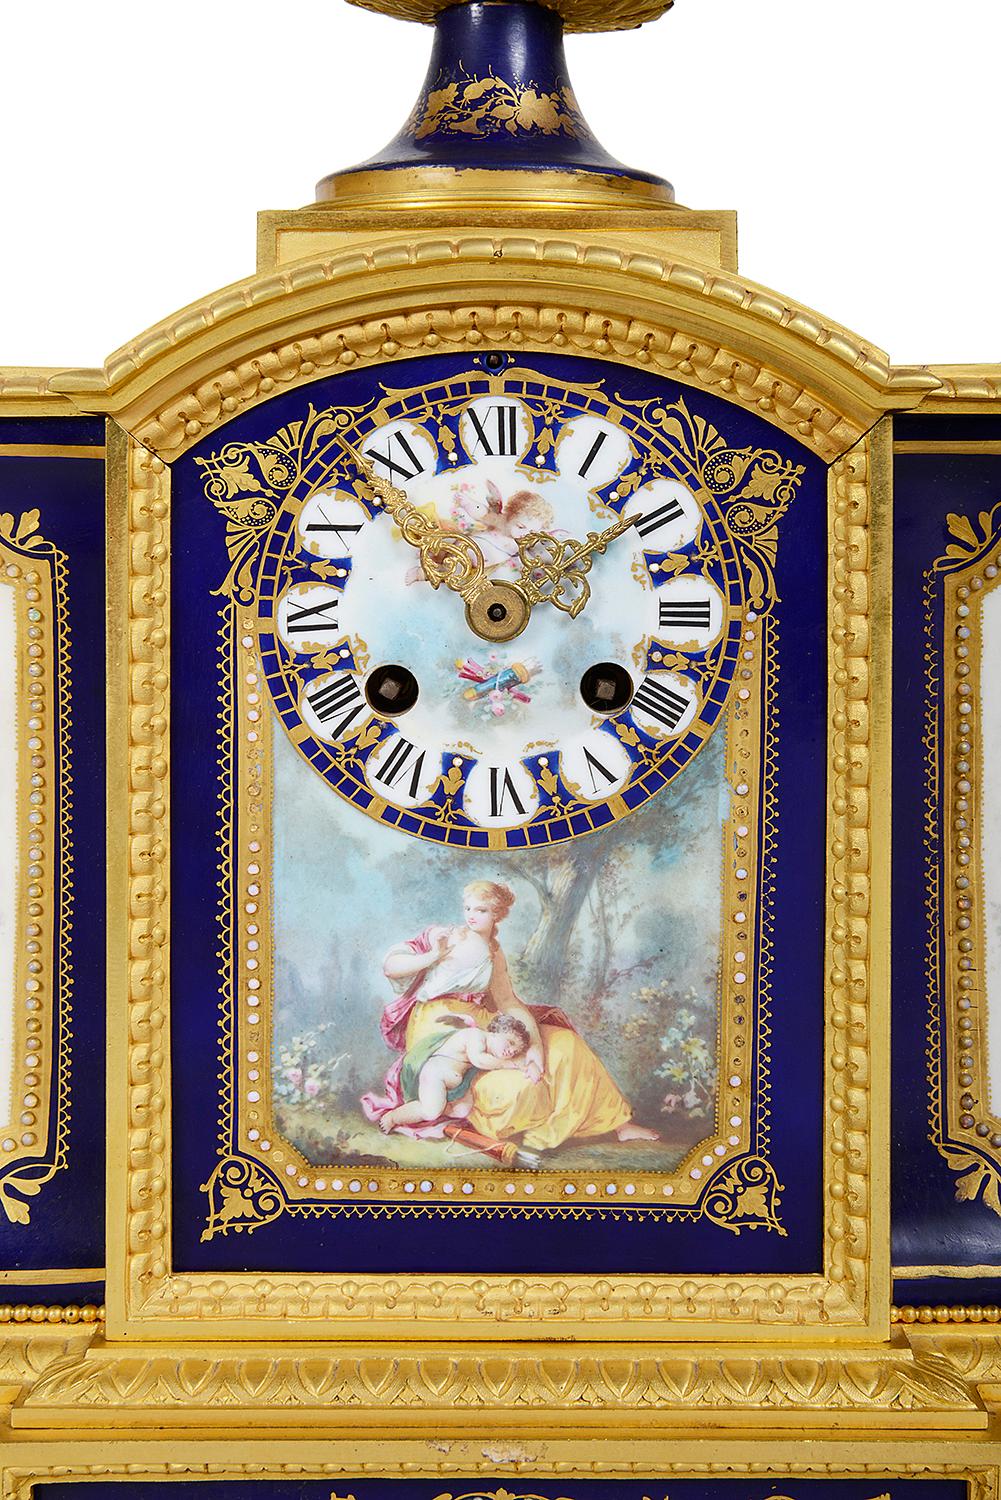 
A fine quality late 19th Century French Sevres style mantel clock, having a wonderful gilded ormolu case with an urn to the top with cobalt blue ground porcelain and an inset classical hand painted scene of a reclining cherub, lion mask handles to